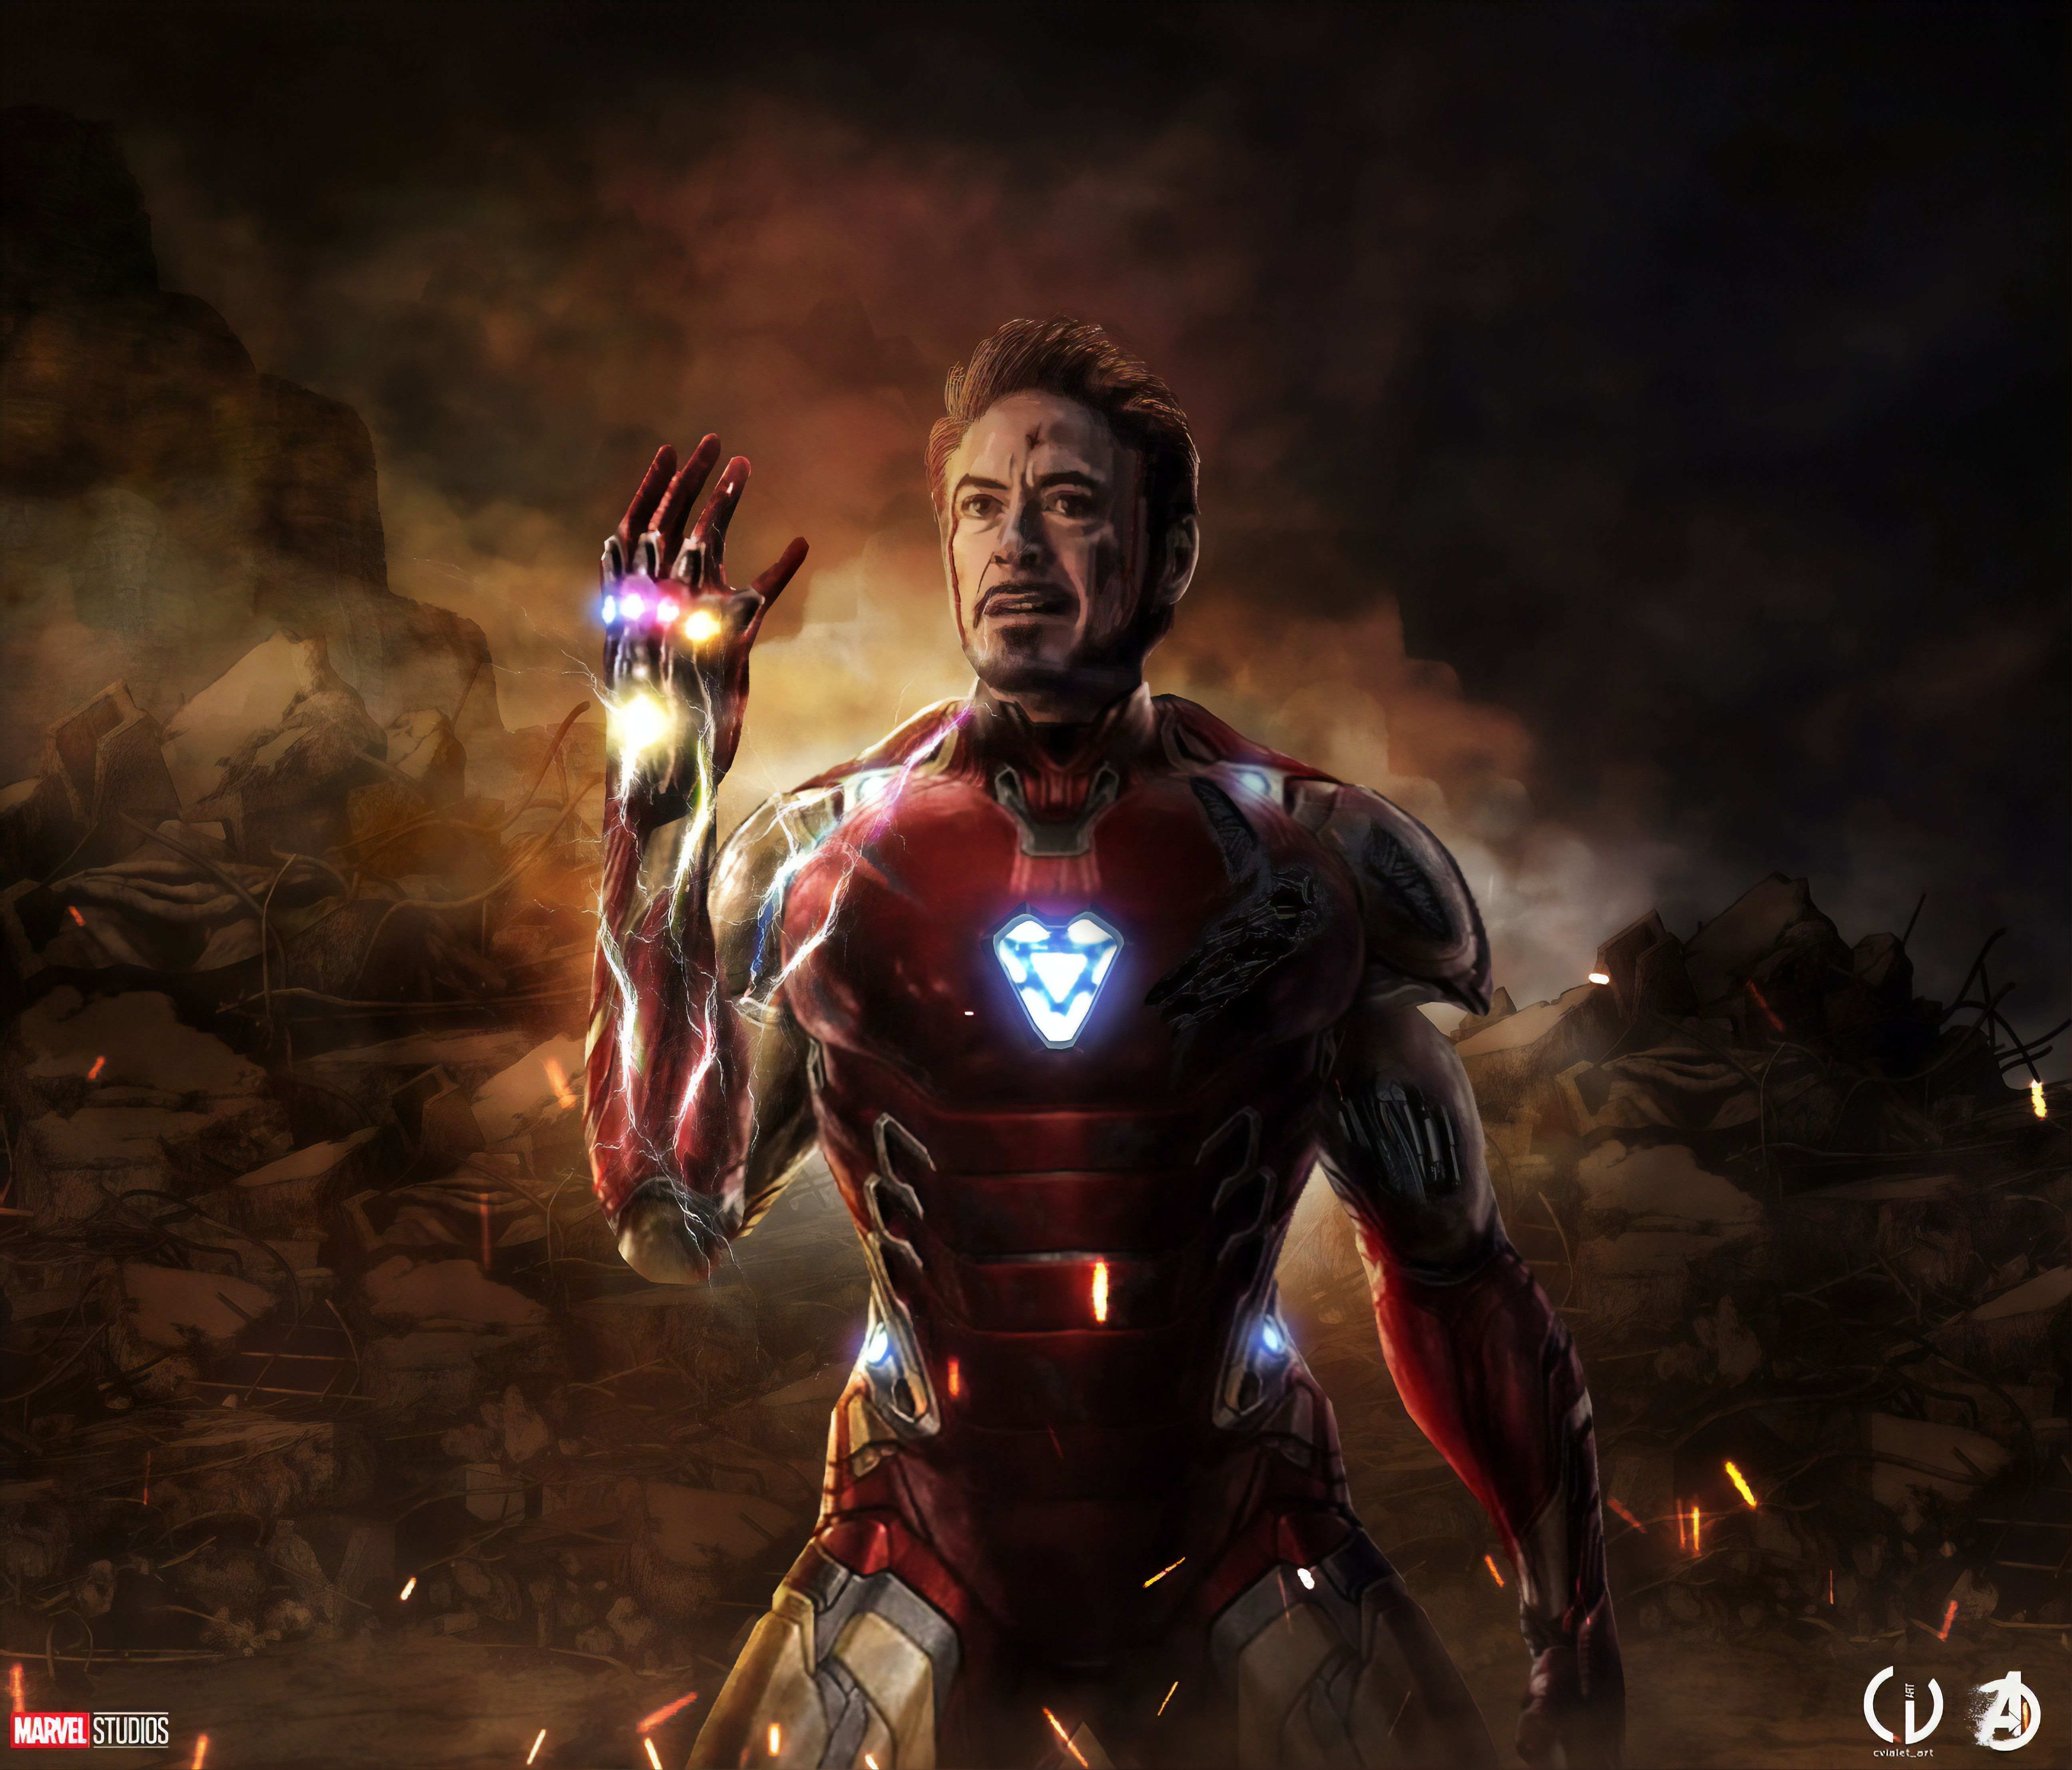 Iron Man Last Scene in Avengers Endgame Wallpaper, HD Movies 4K Wallpaper, Image, Photo and Background